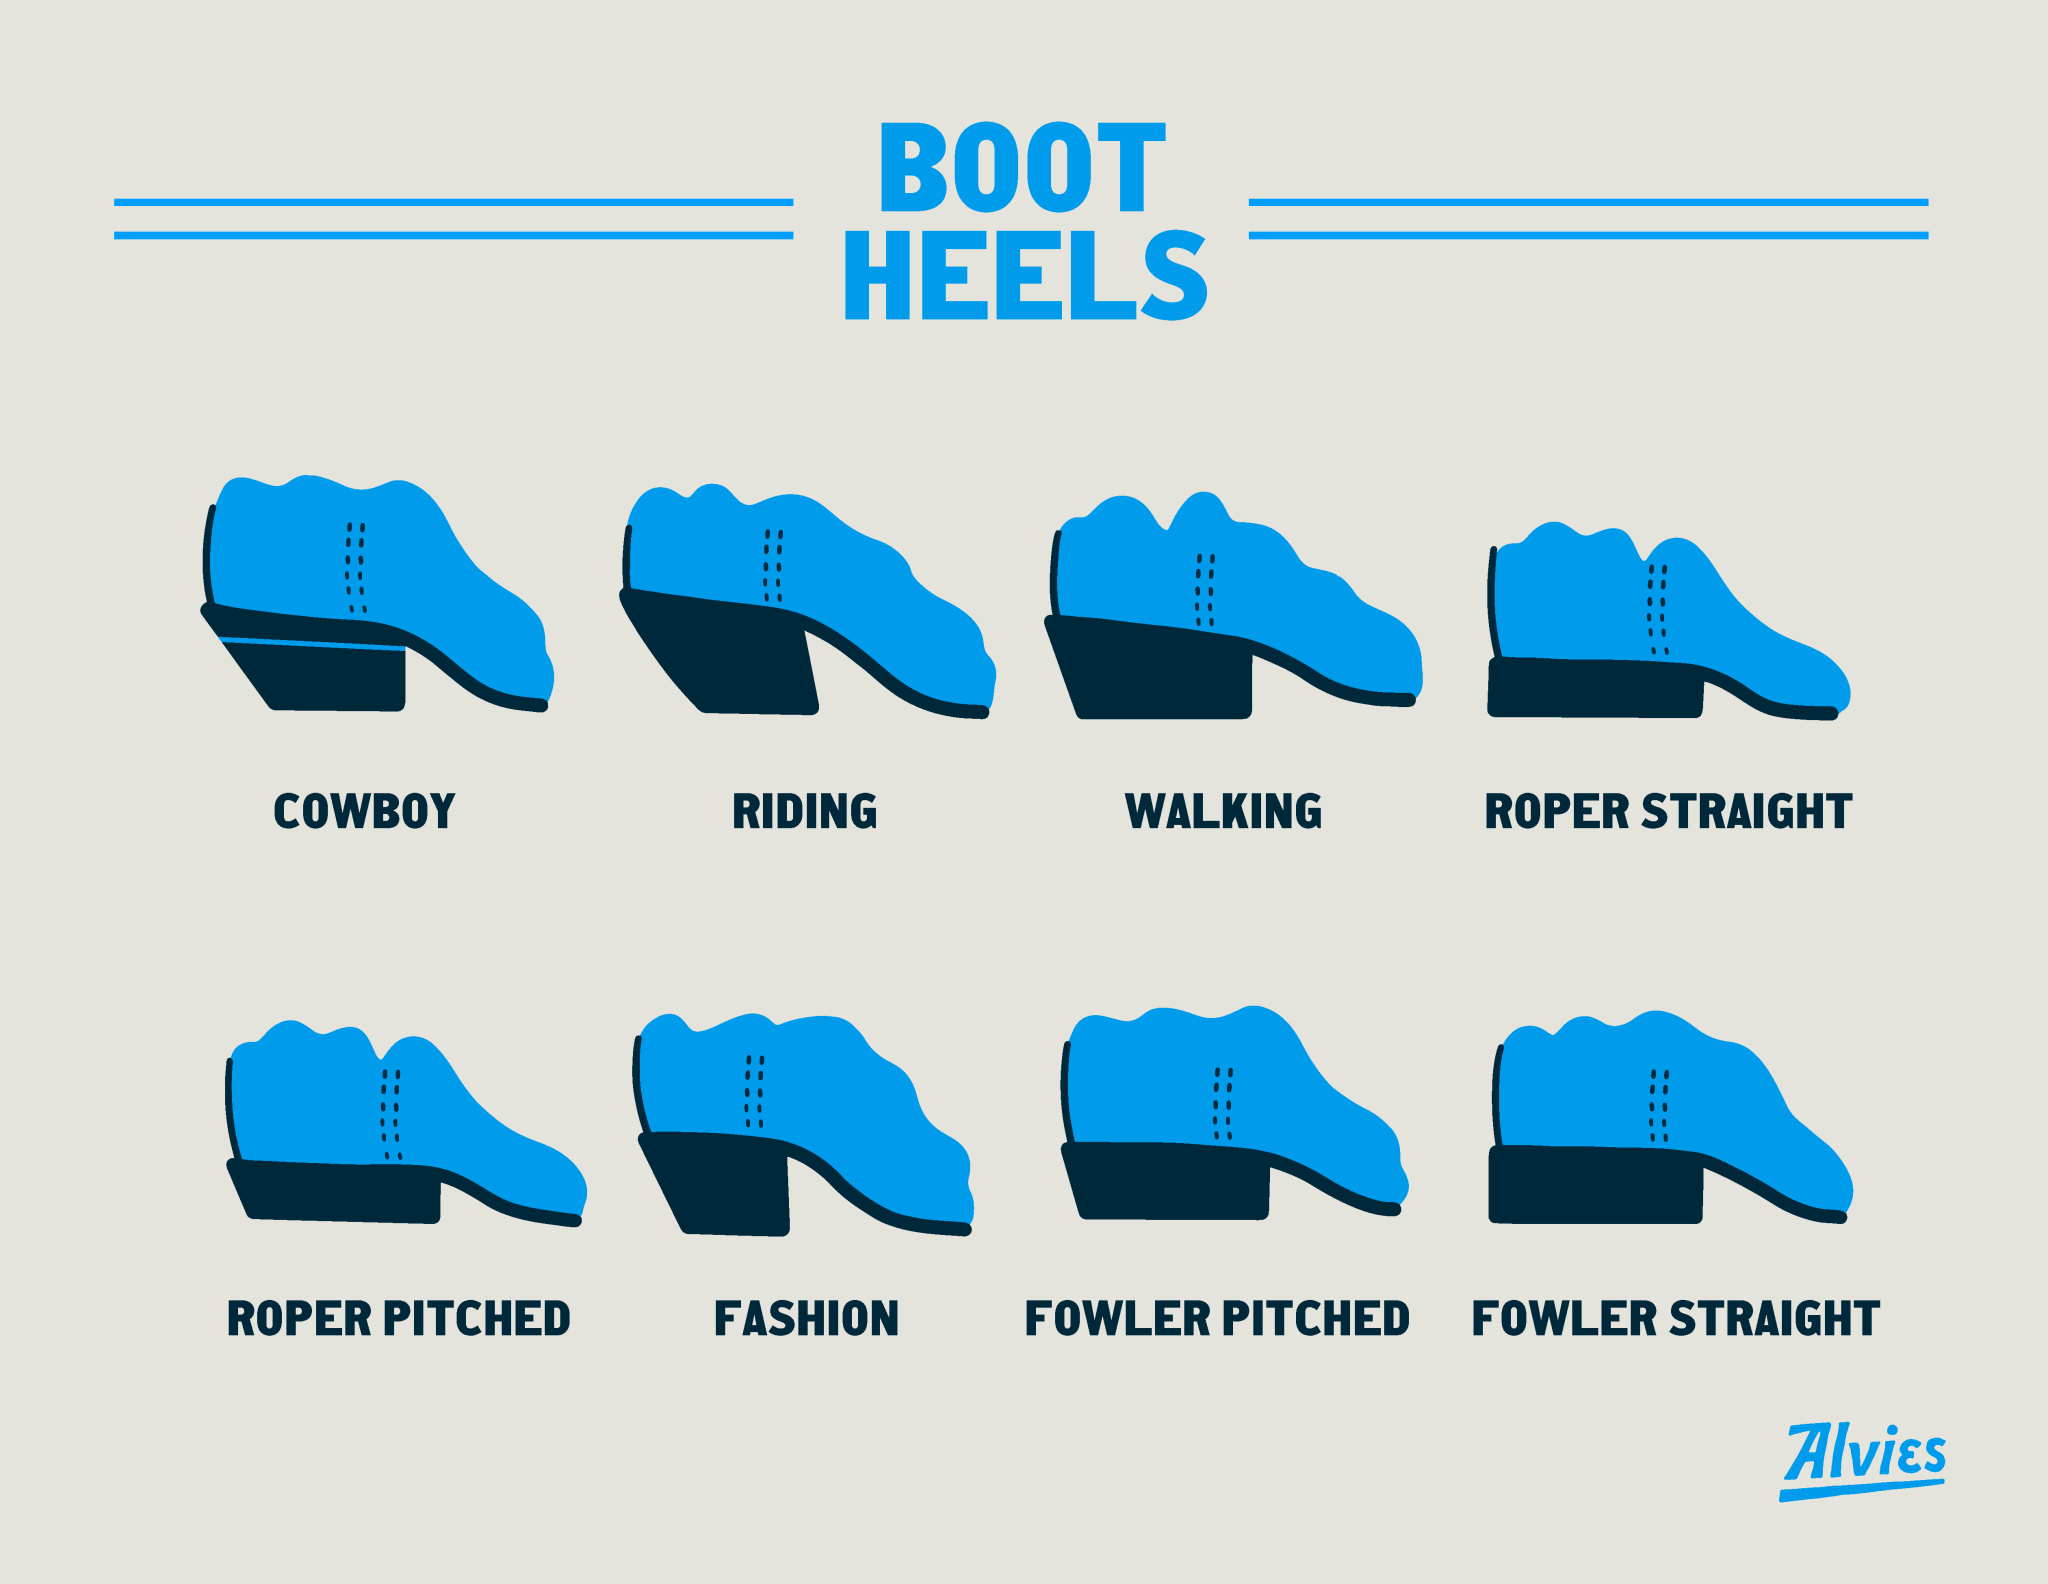 COWBOY BOOT HEEL STYLES (AND WHY ALVIES BOOTS HAVE COWBOY HEELS) - Alvies